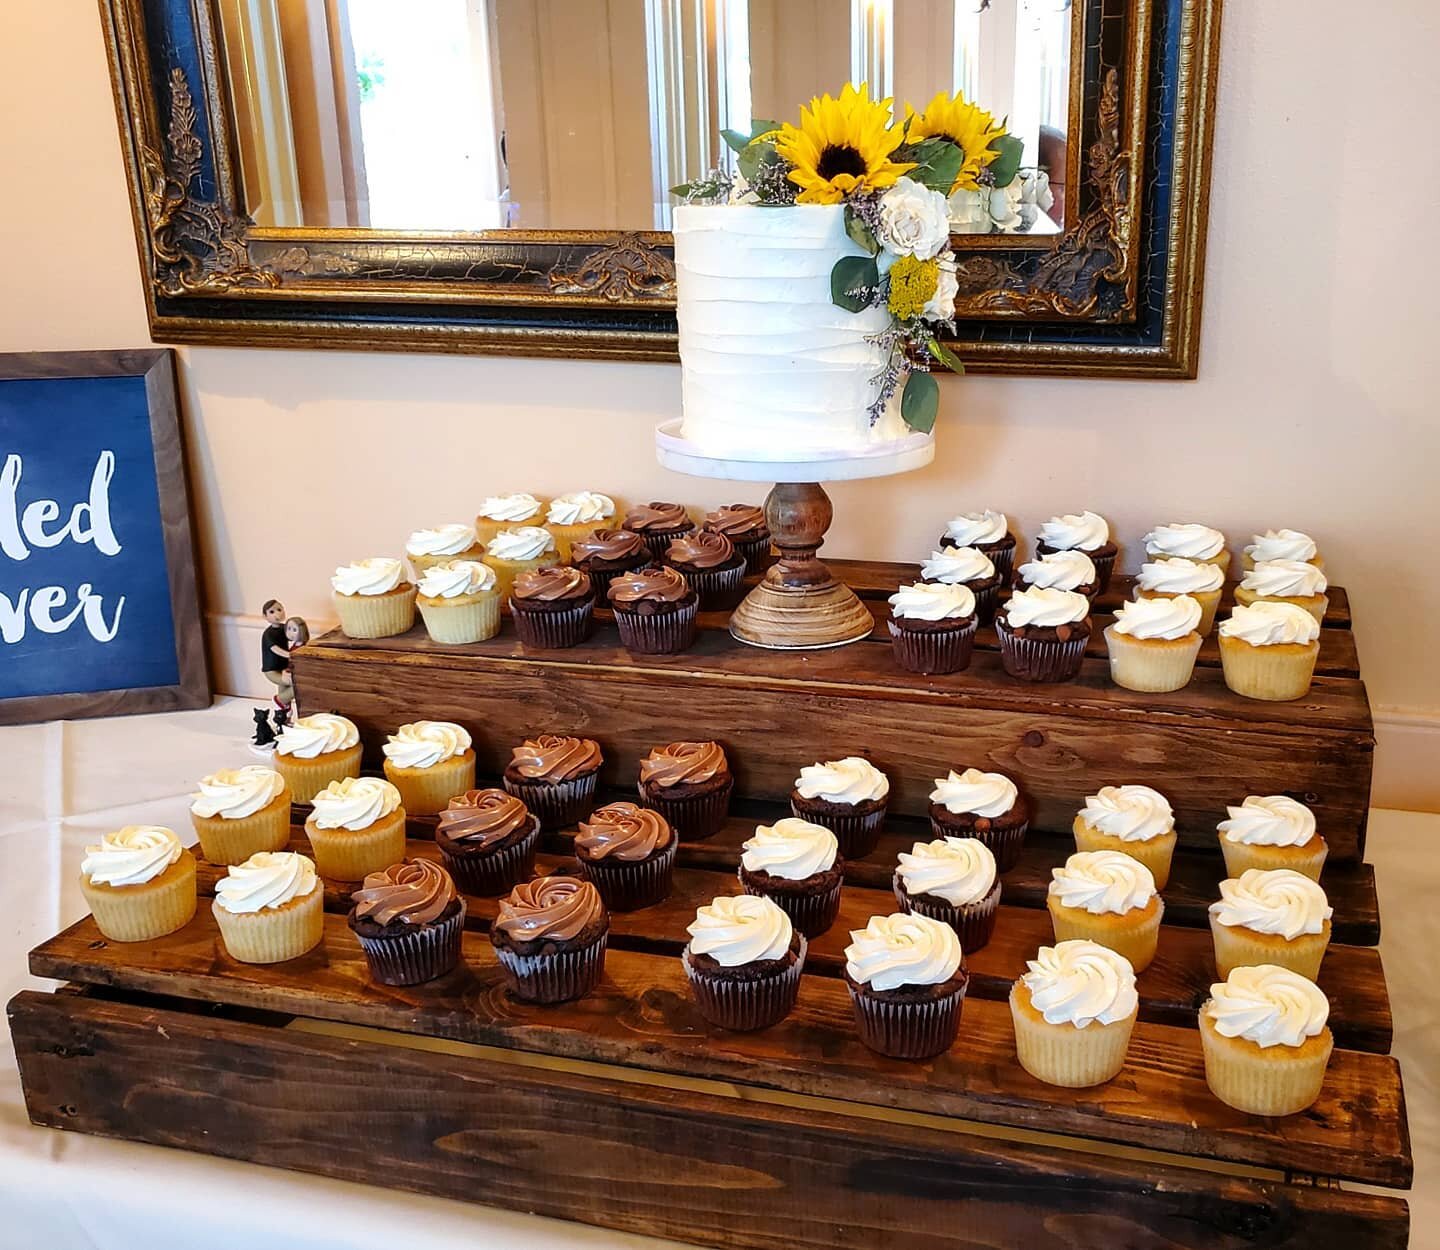 Thinking about individual desserts with a cutting cake? We offer cupcakes as well as a wide array of other desserts as well 🧁  #cupcakes #cupcake #cupcakesofinstagram #cupcakewedding #wedding #weddings #cuttingcake #weddingcupcakes #dessertbar #smal